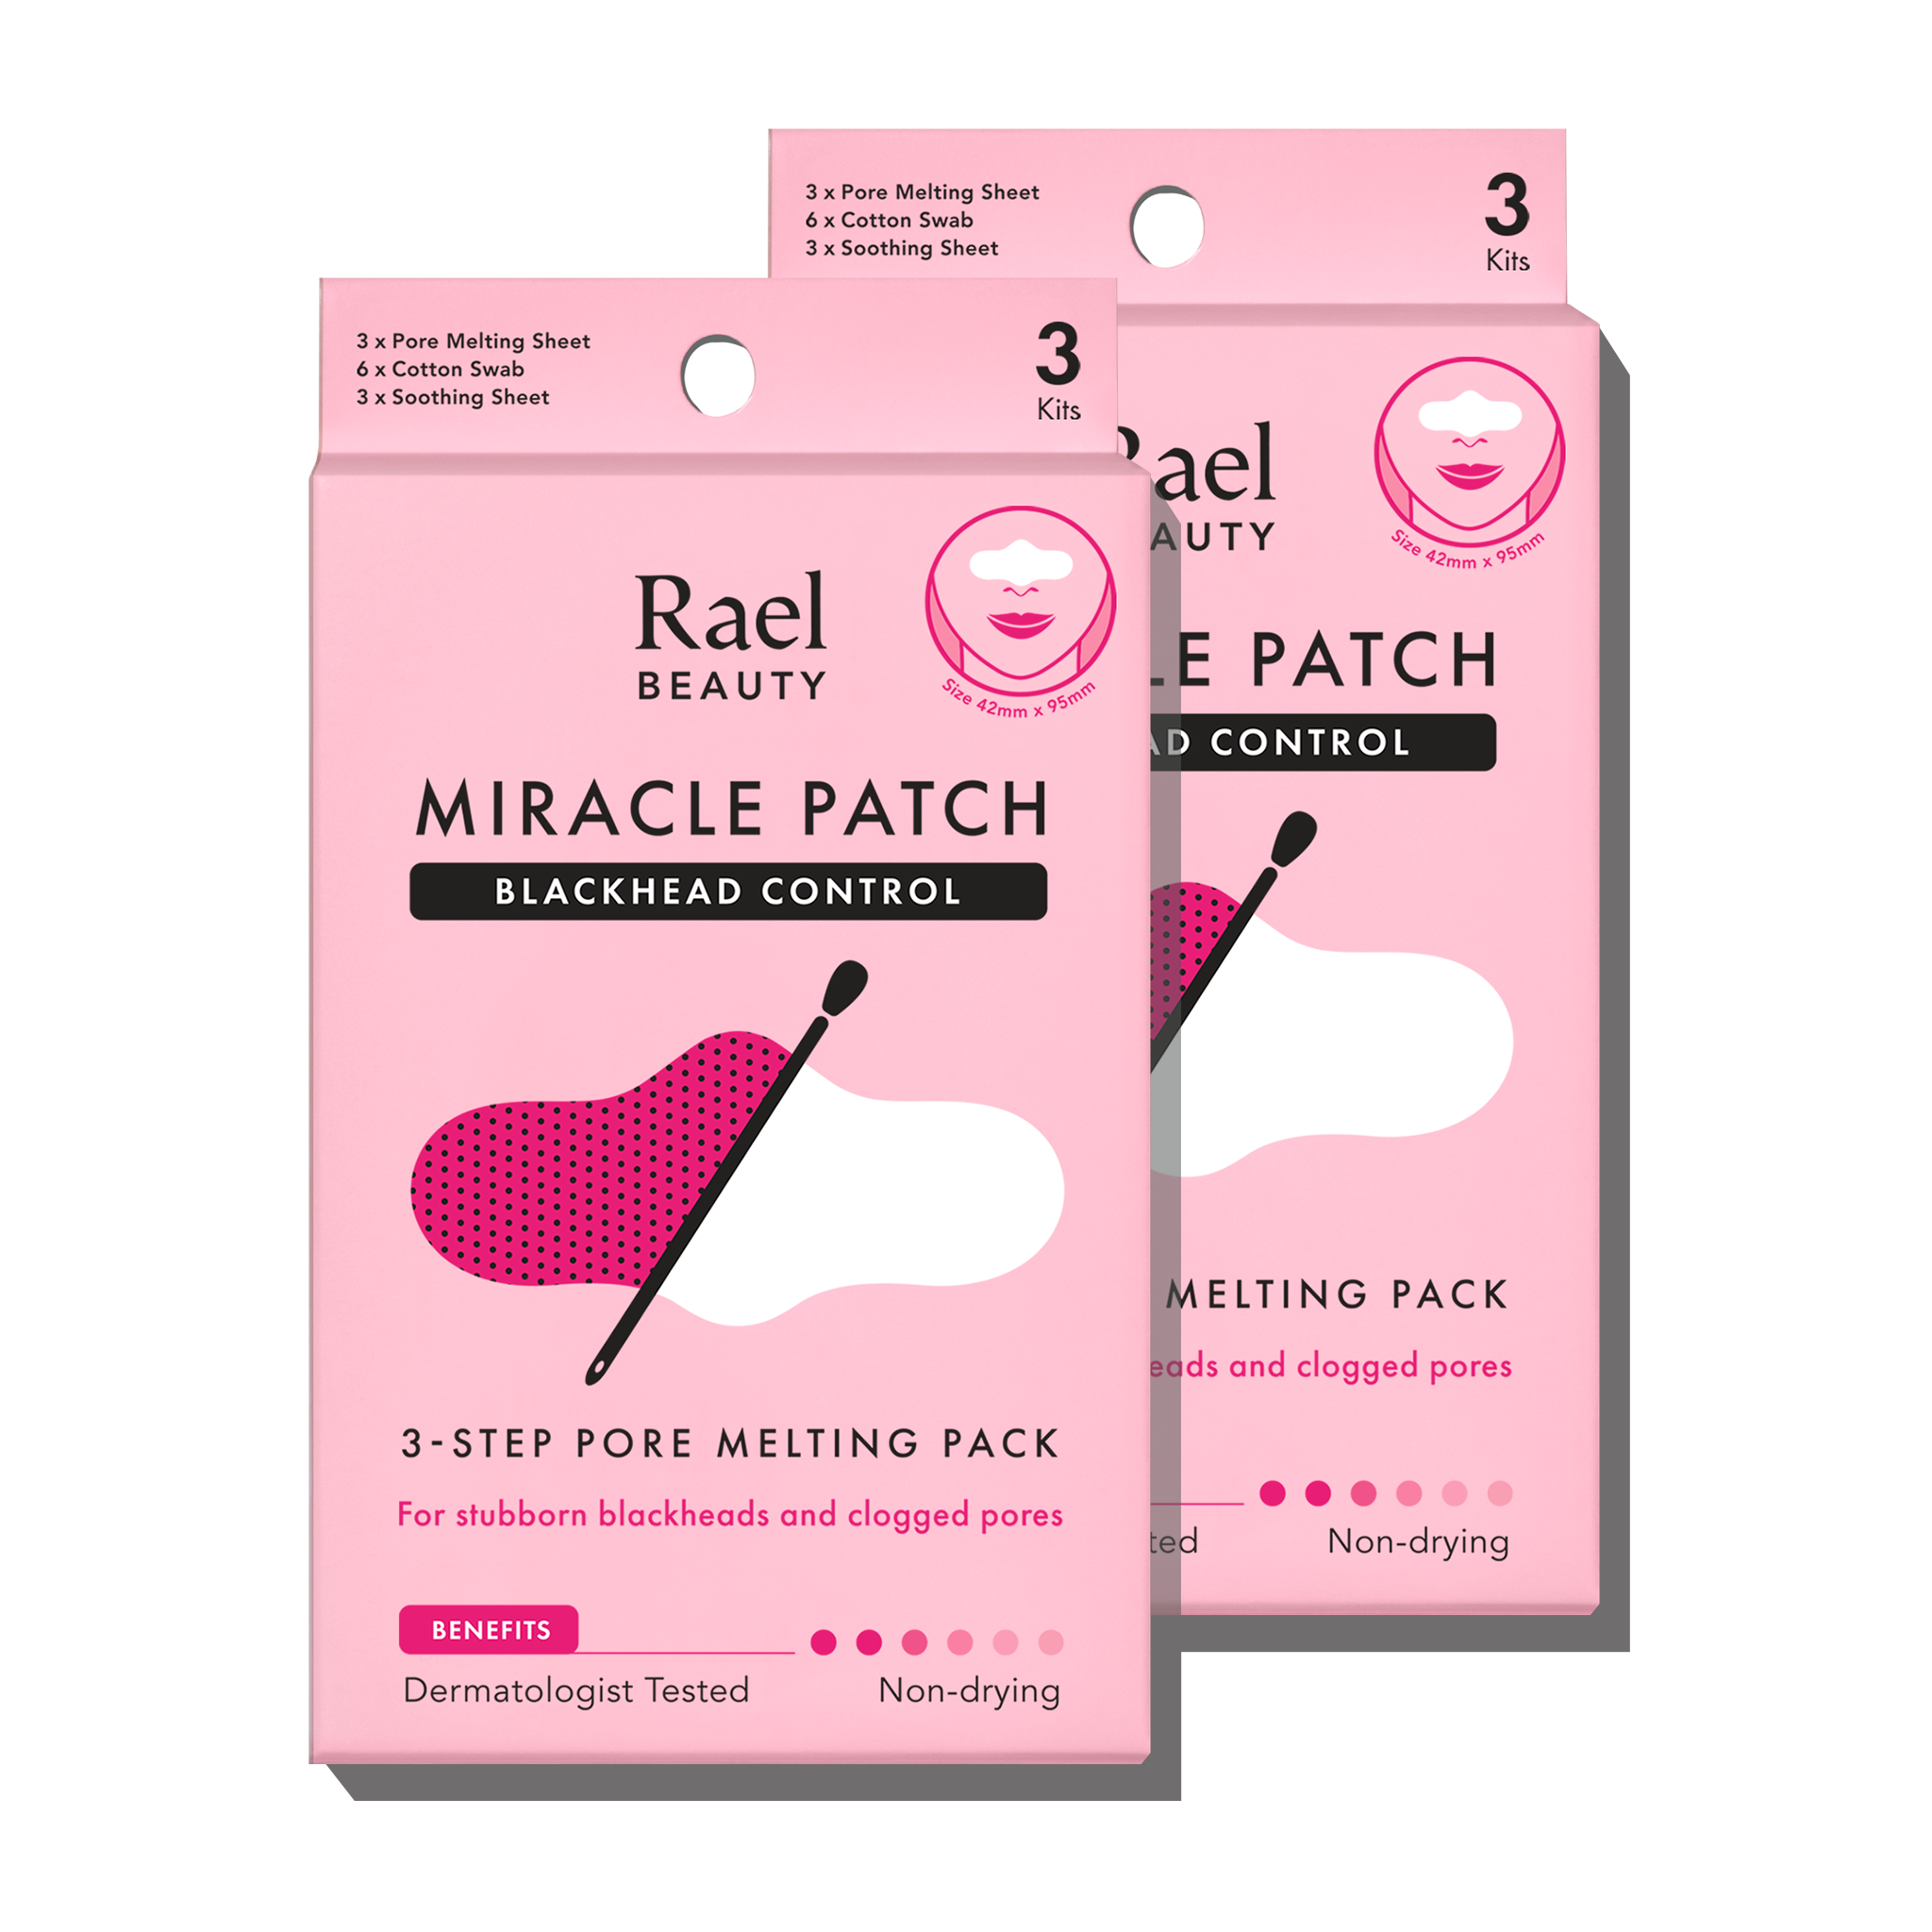 The Good Patch Rescue Patch 4 Pack : Better For You fast delivery